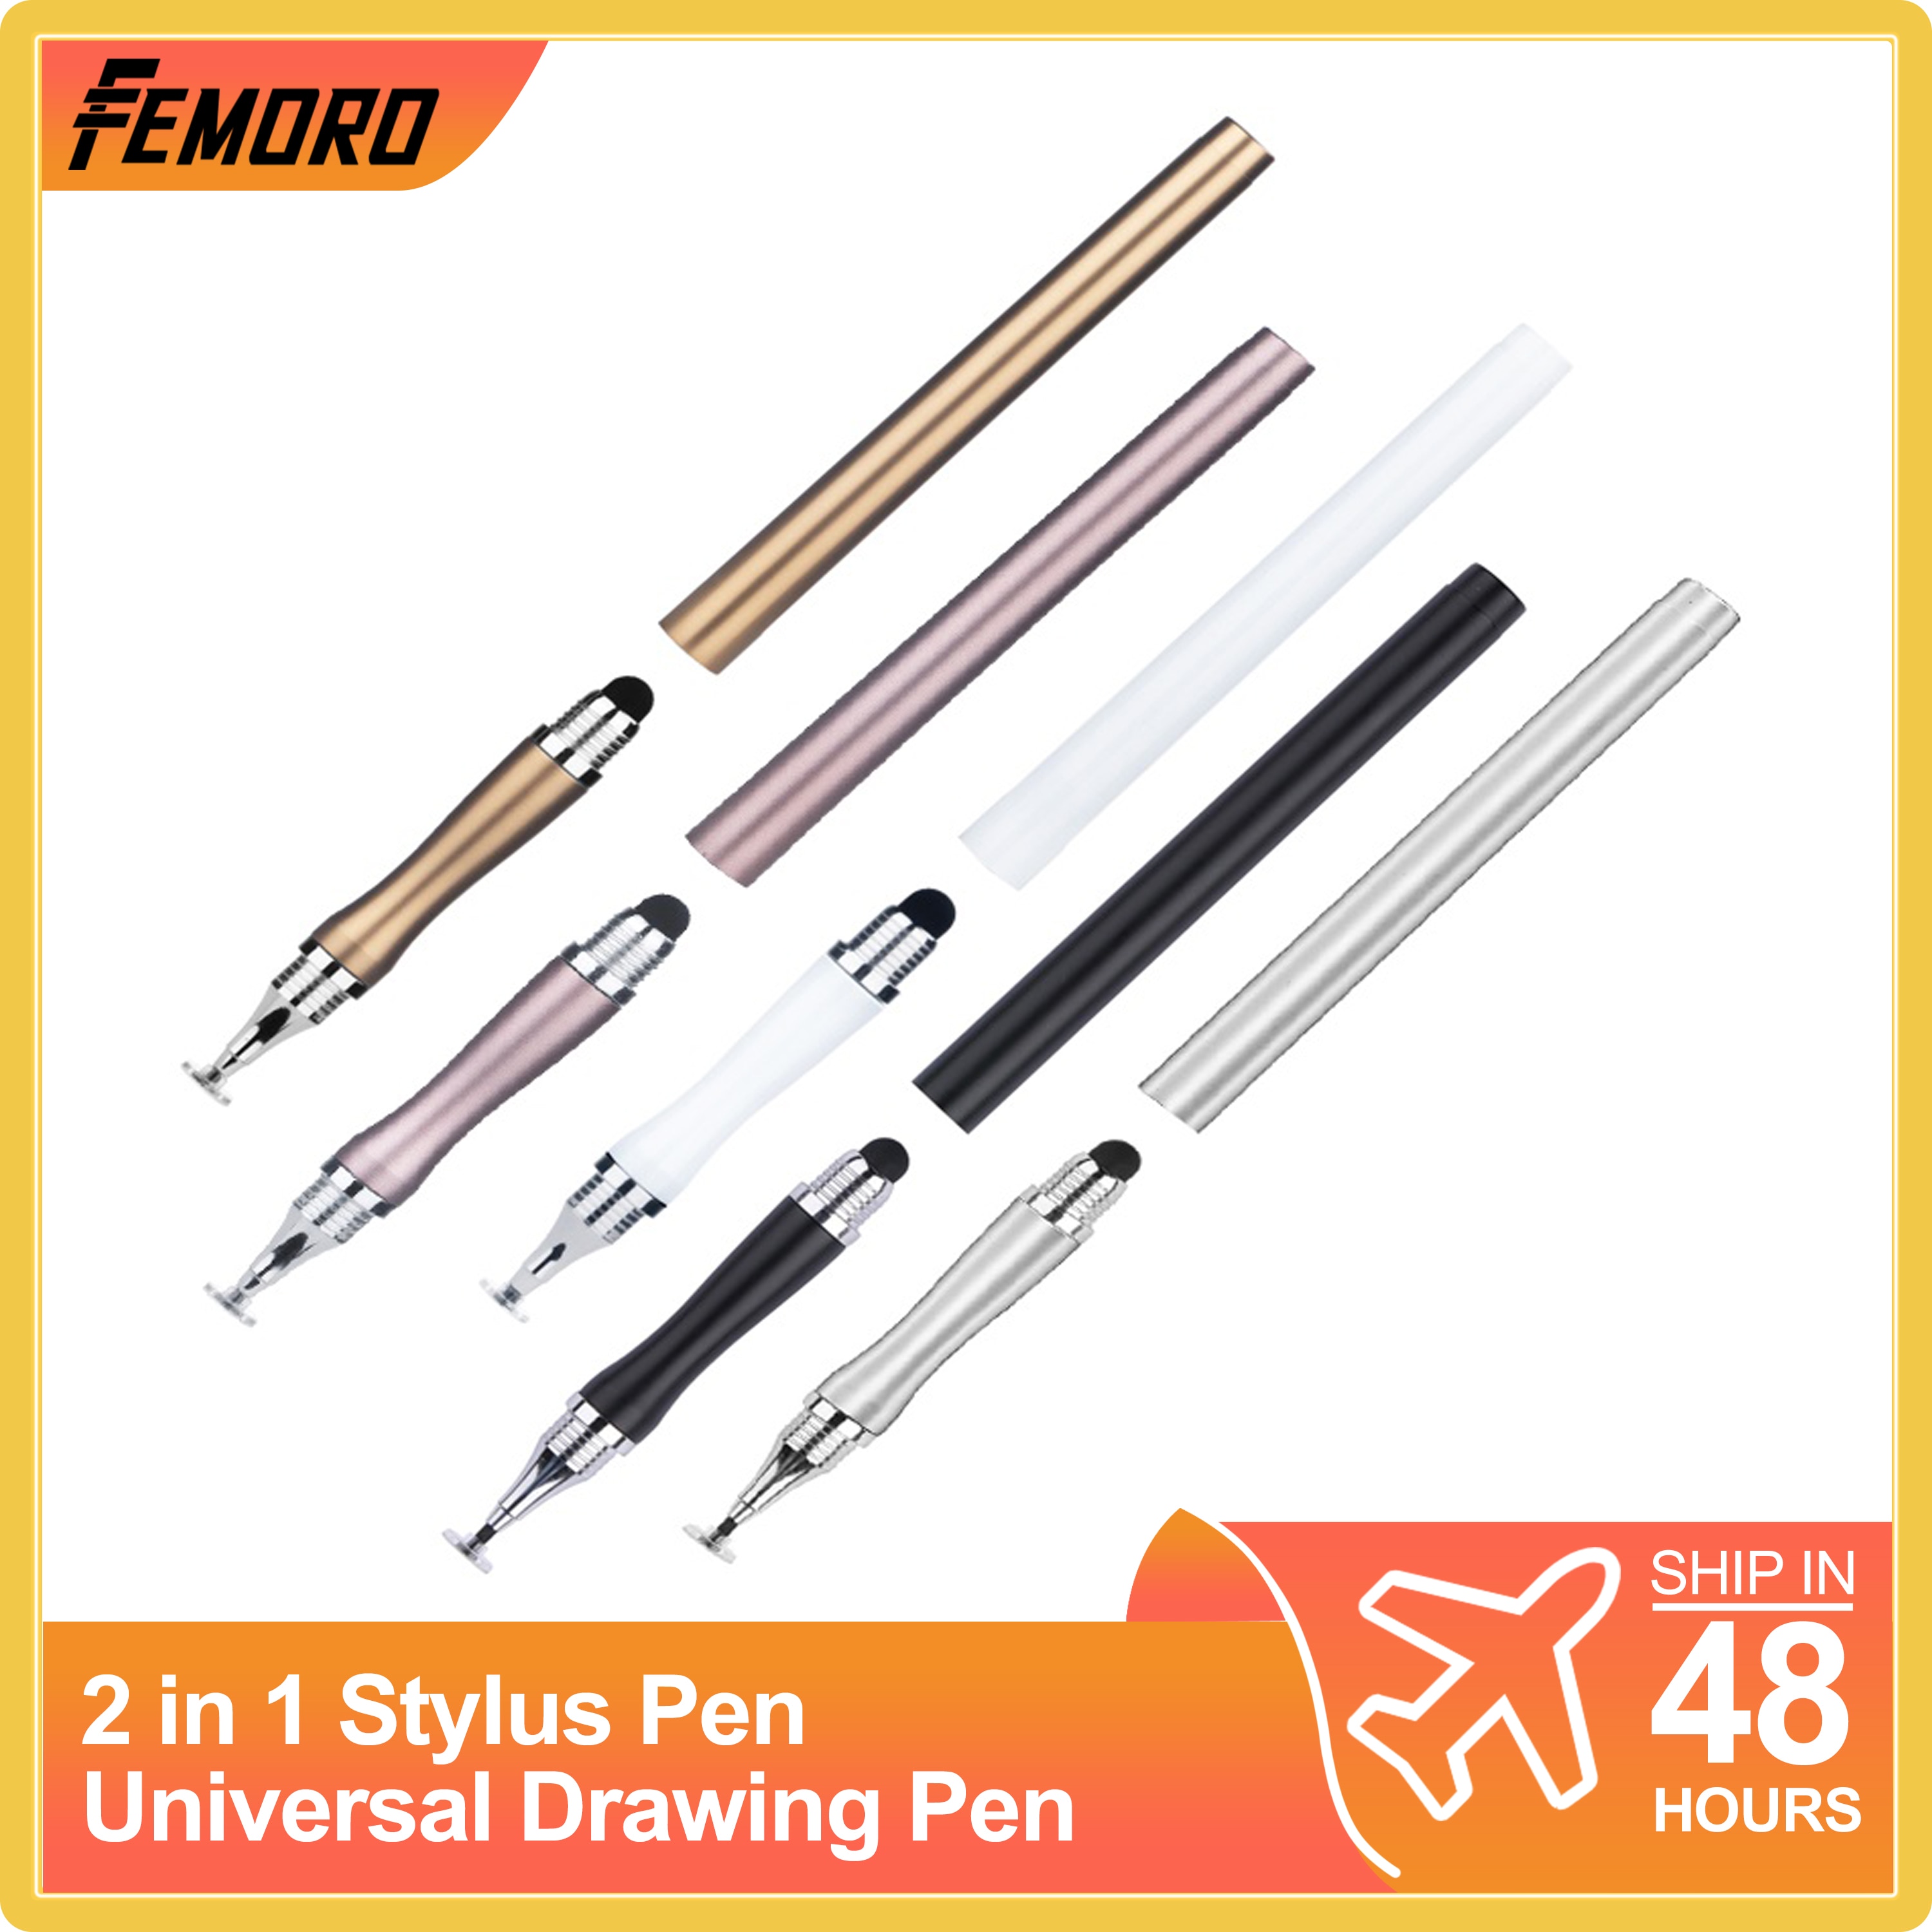 2 in 1 Stylus Pen,Femoro Universal Drawing Tablet Capacitive Screen Touch Pen for Mobile Android Phone Smart Pencil Accessories